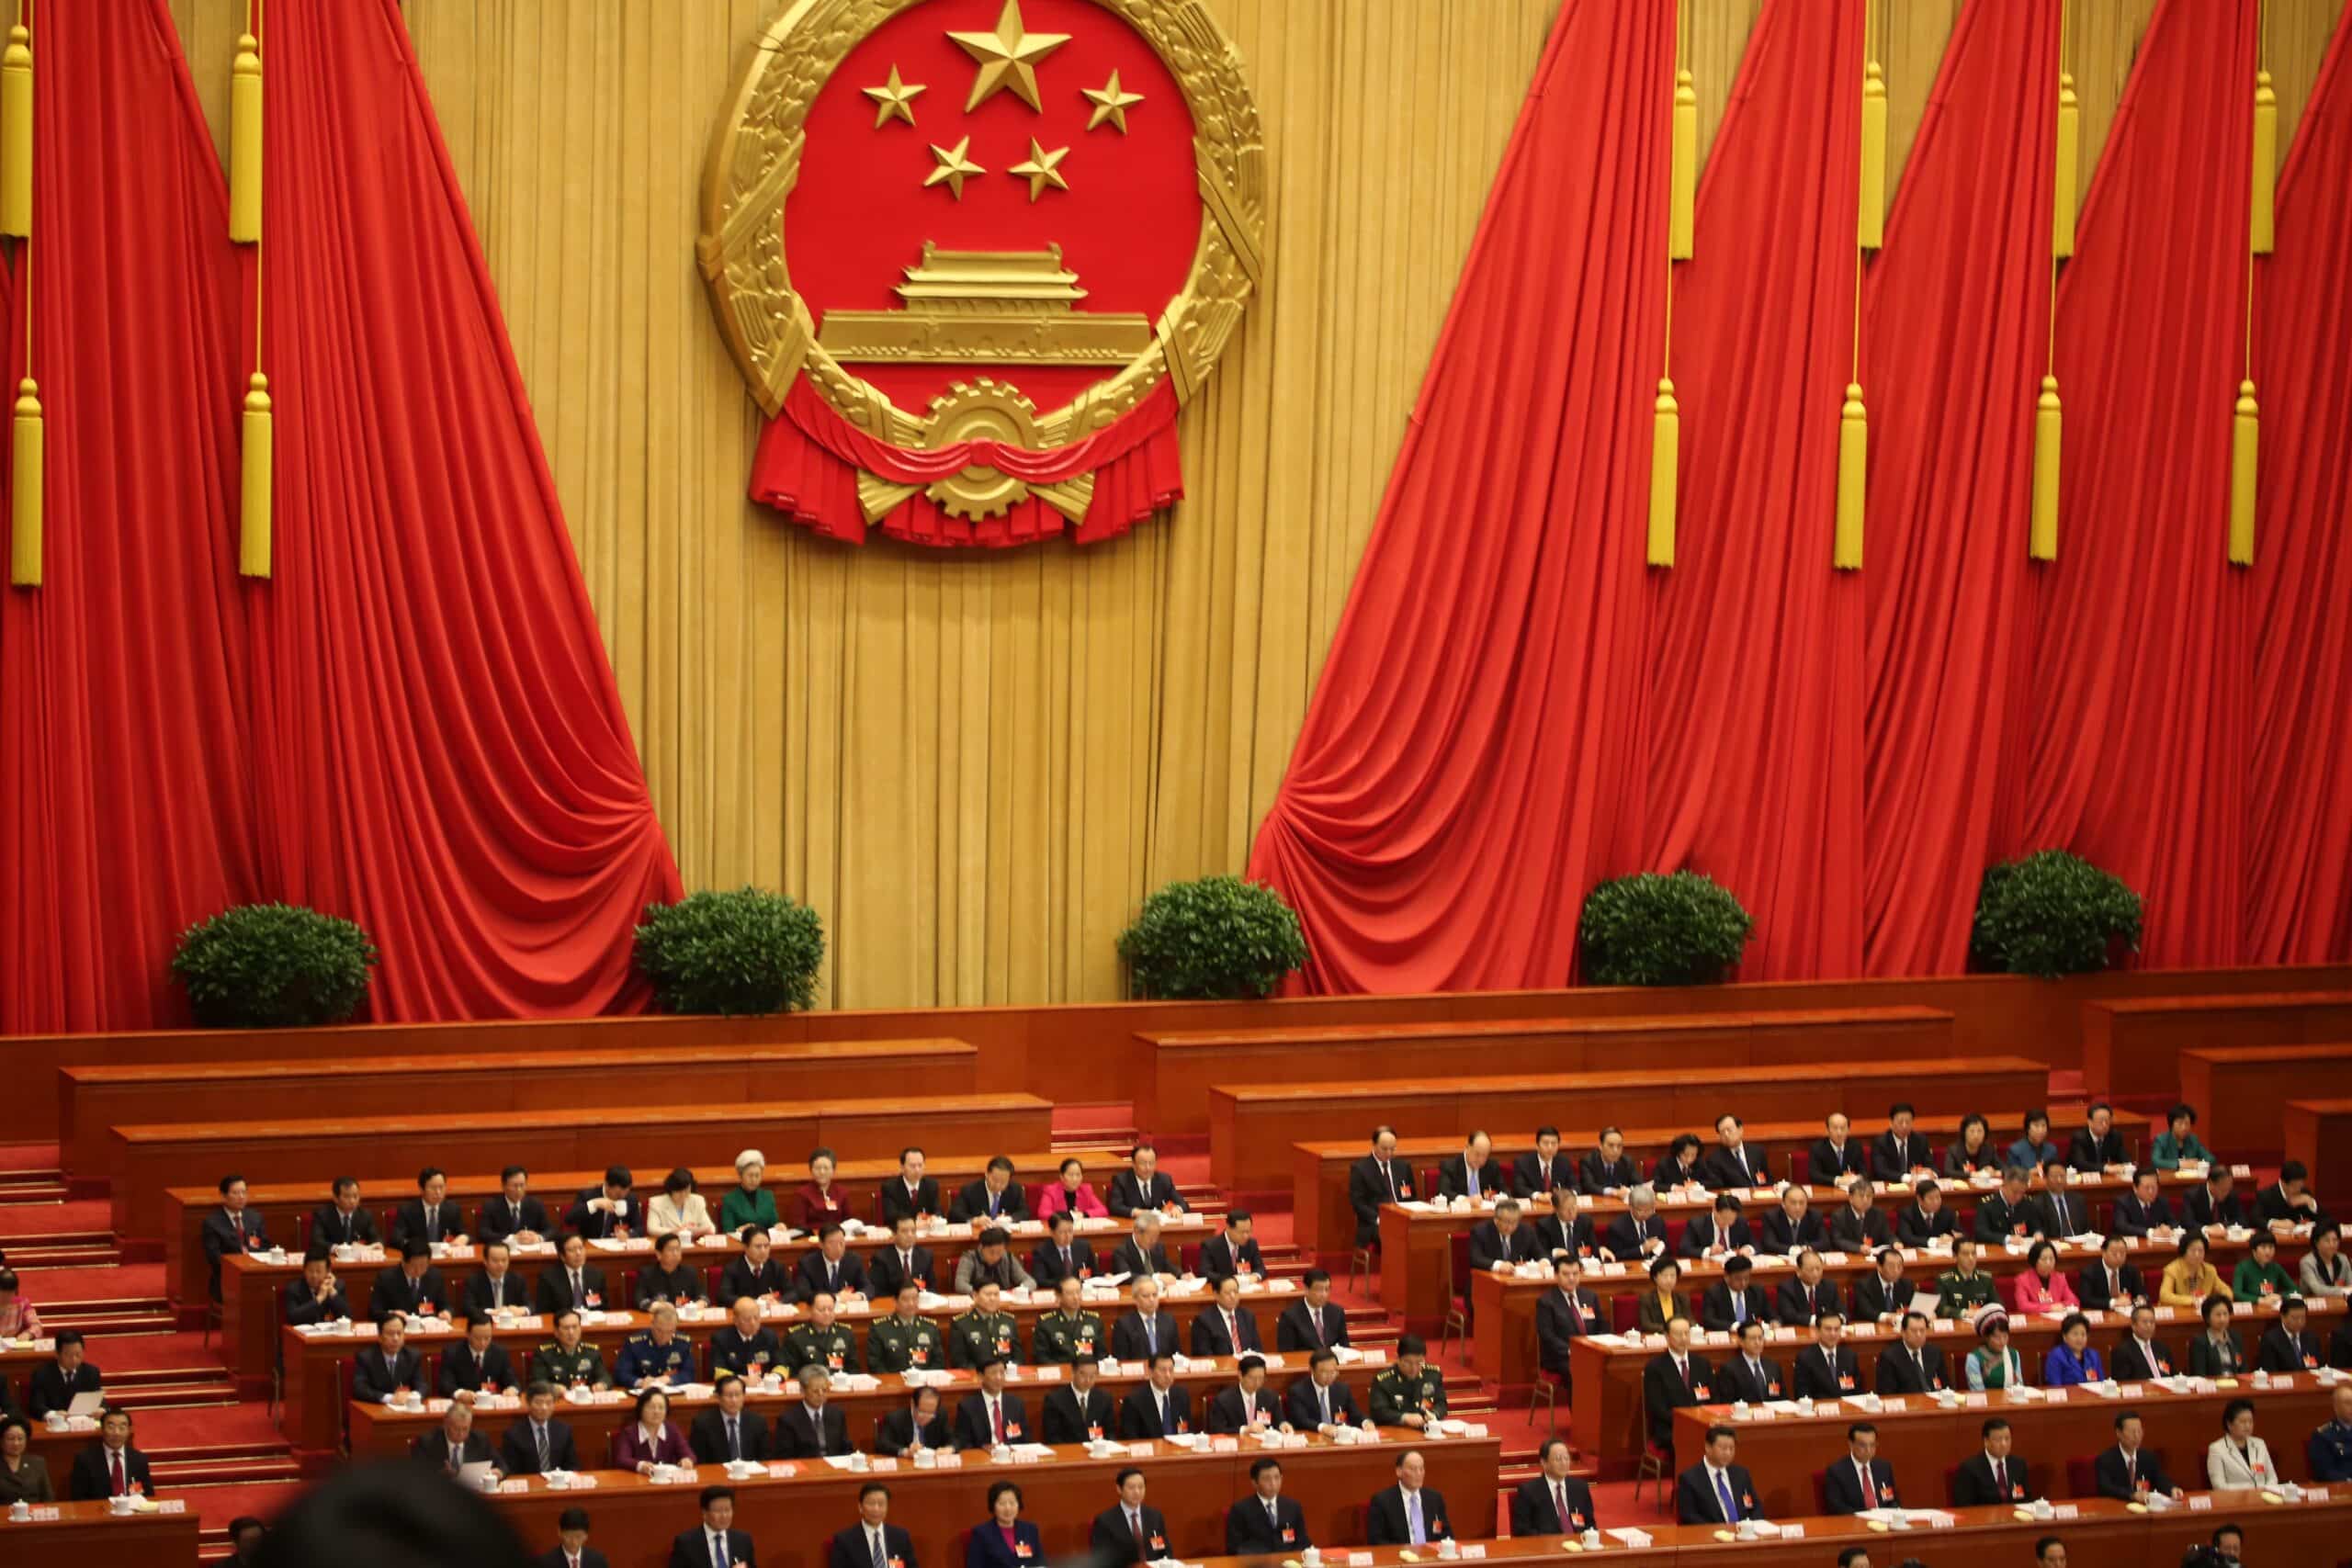 Xi Jinping and other members of the Chinese leadership meeting in the Great Hall of the People in Beijing, China